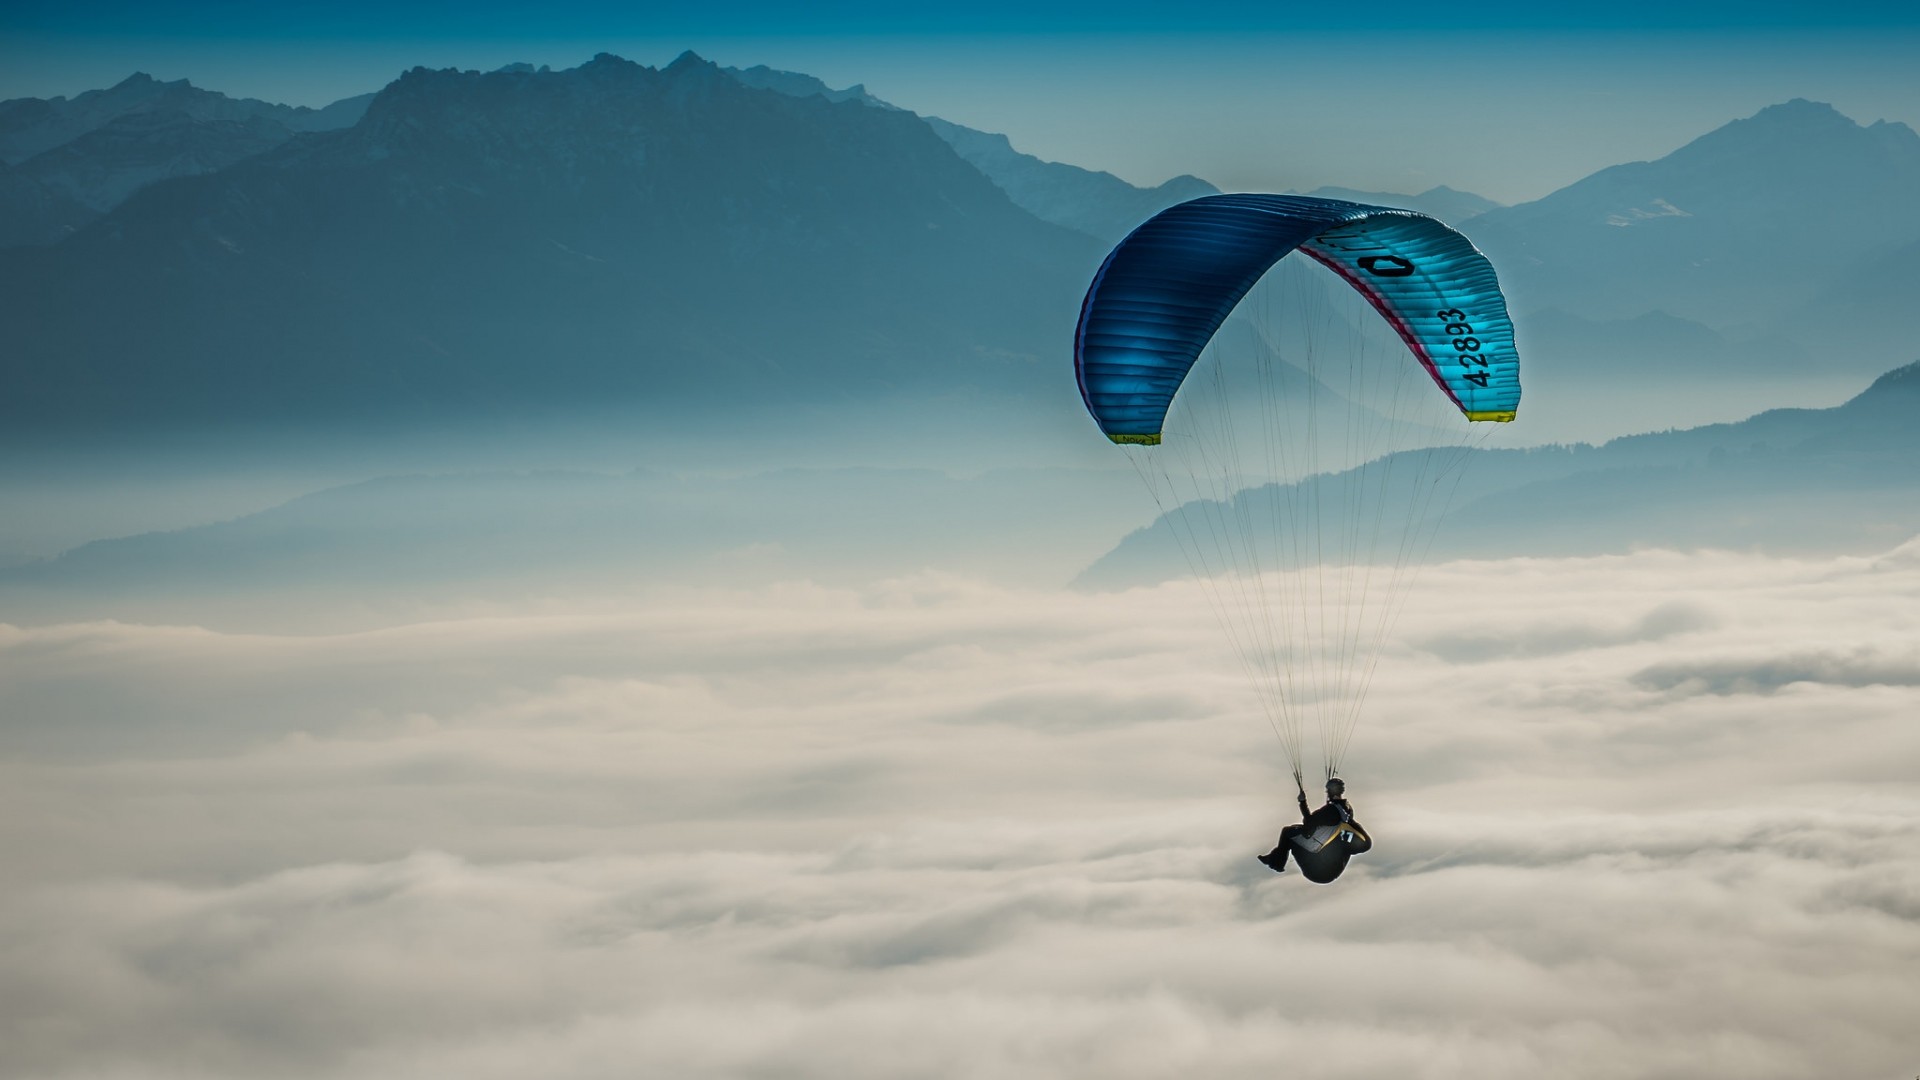 1920x1080 Paragliding Sky Slouds HD Wallpaper [] Need #iPhone #6S #Plus #